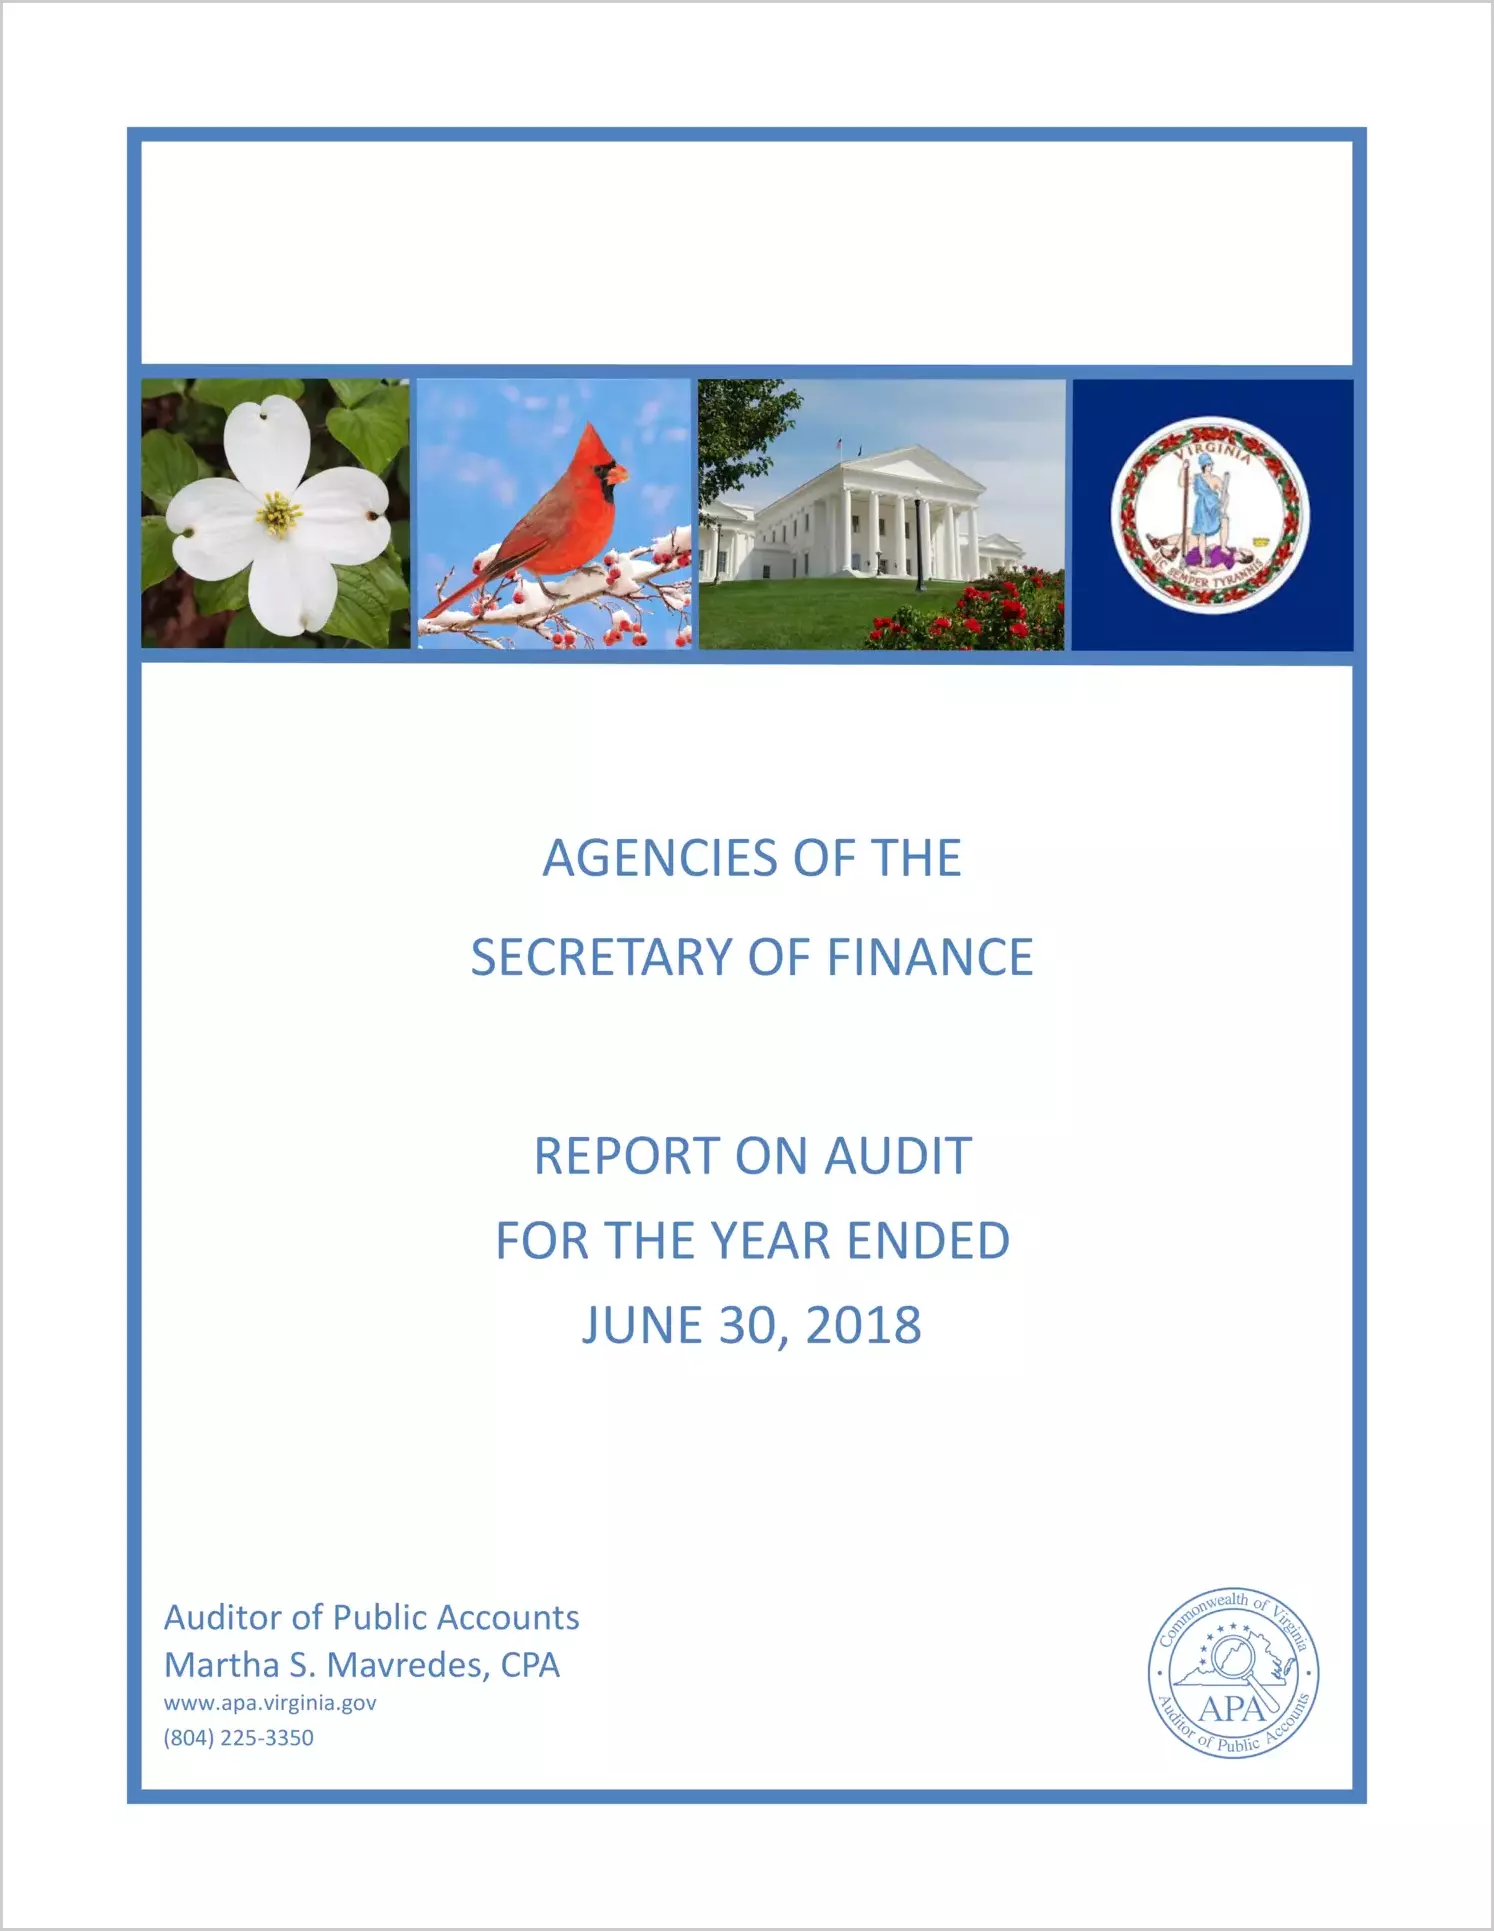 Agencies of the Secretary of Finance for the year ended June 30, 2018